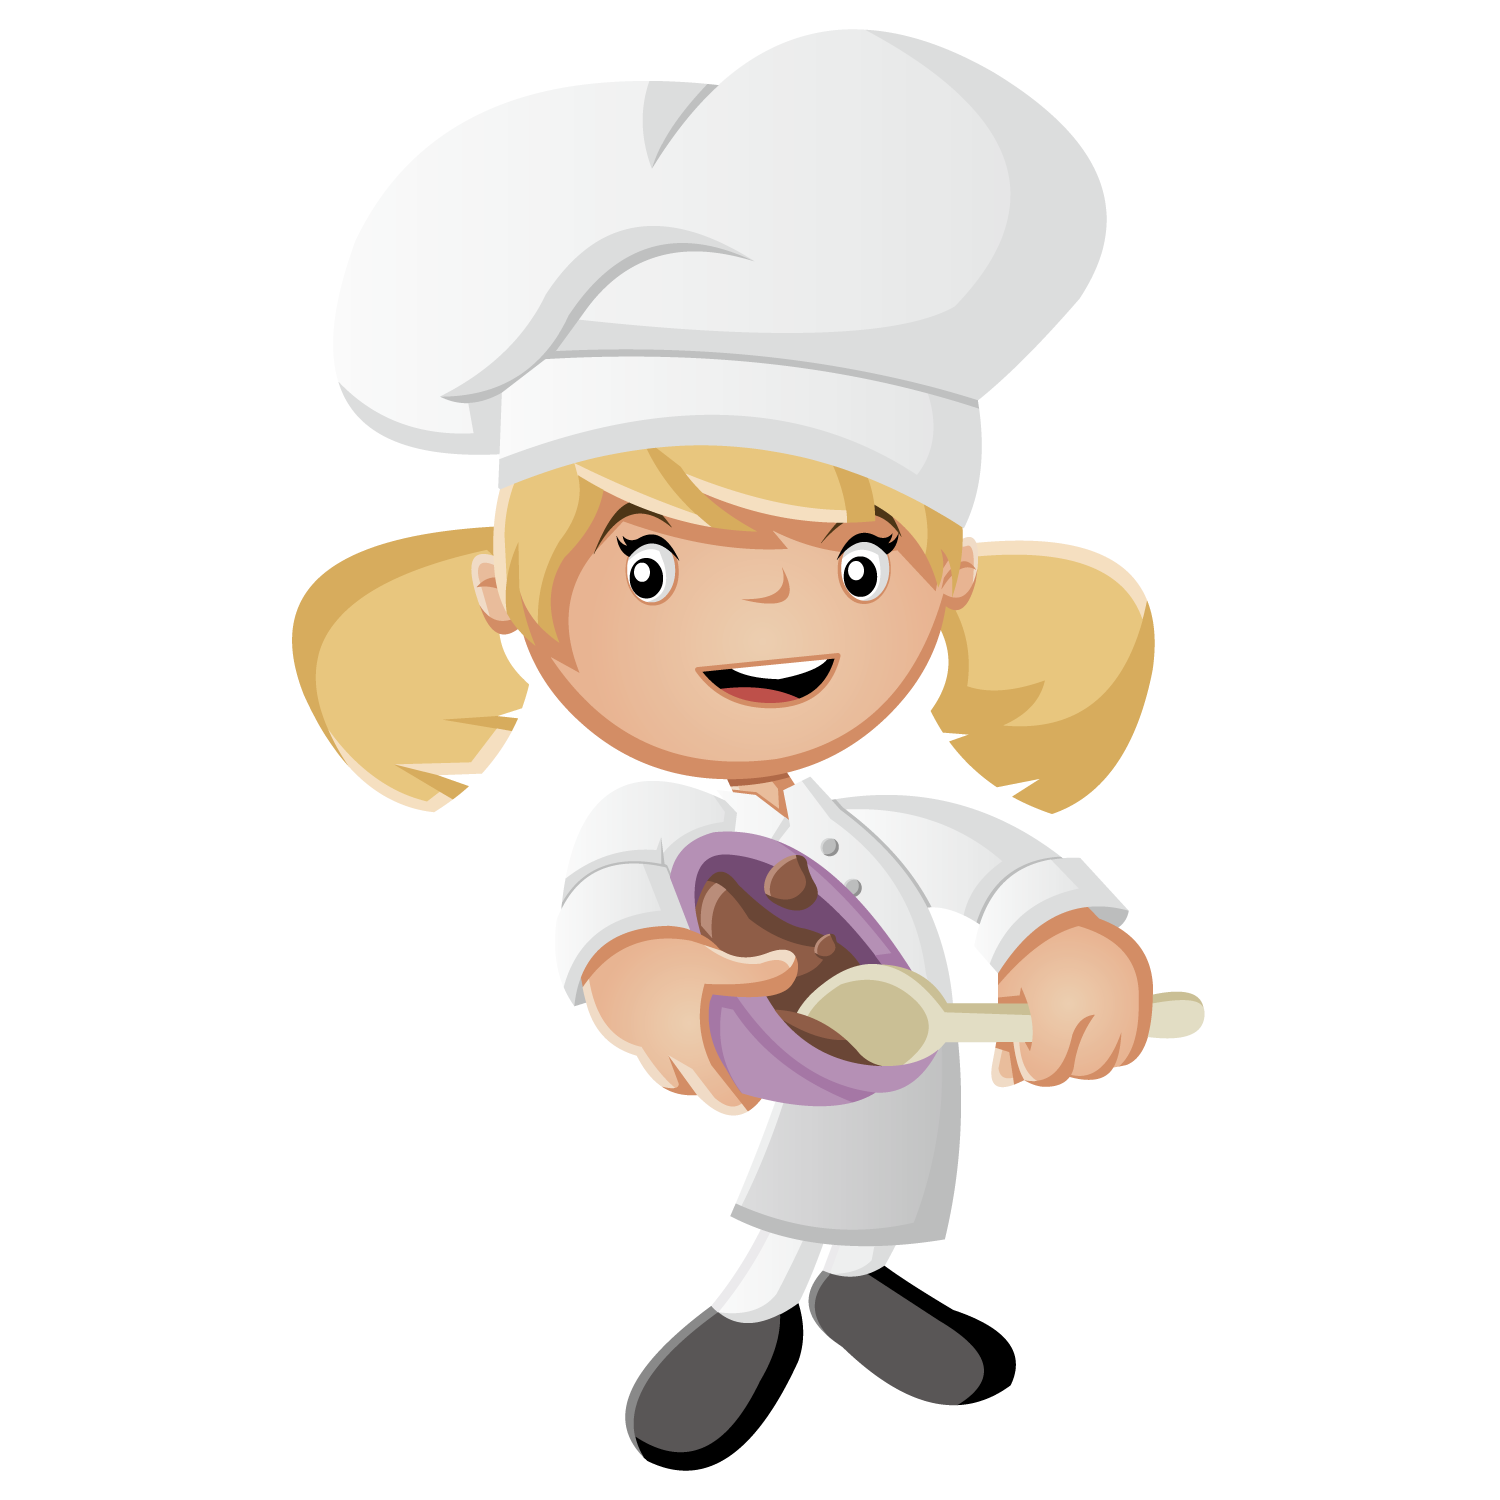 Chef Cartoon Cook Illustration - Cooking cooks png download - 1500*1500 -  Free Transparent Chef png Download. - Clip Art Library